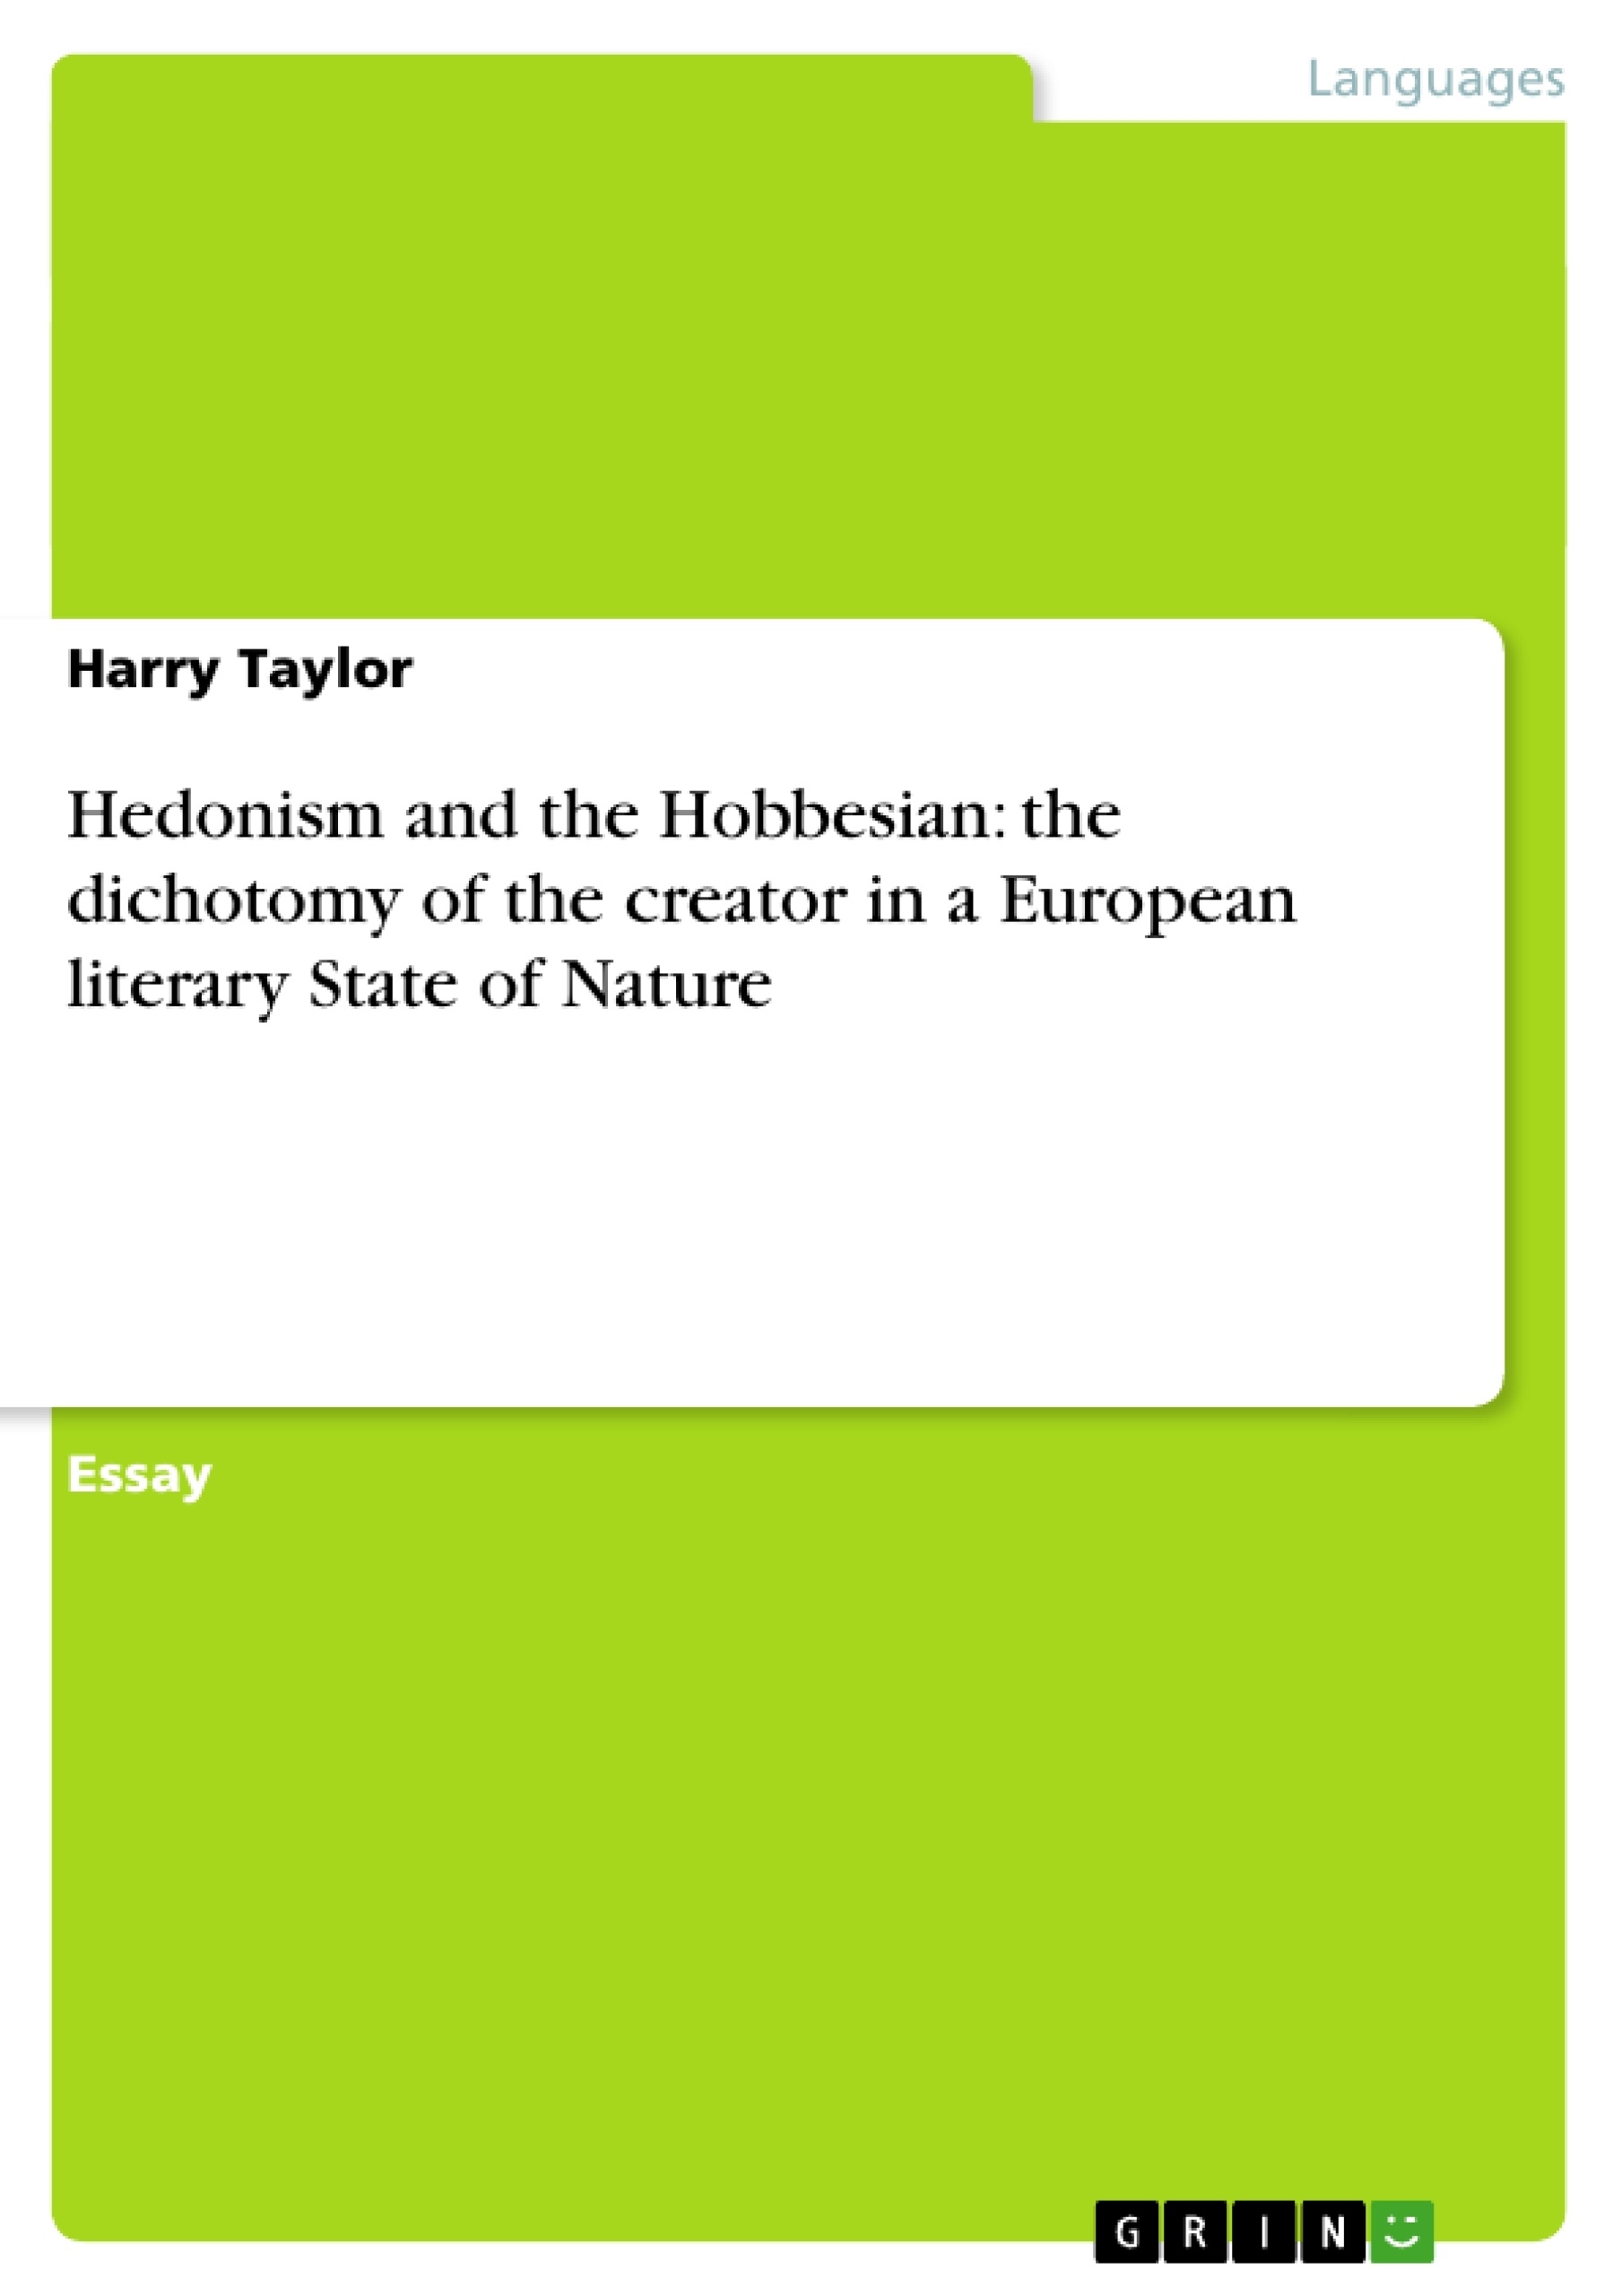 Titel: Hedonism and the Hobbesian: the dichotomy of the creator in a European literary State of Nature